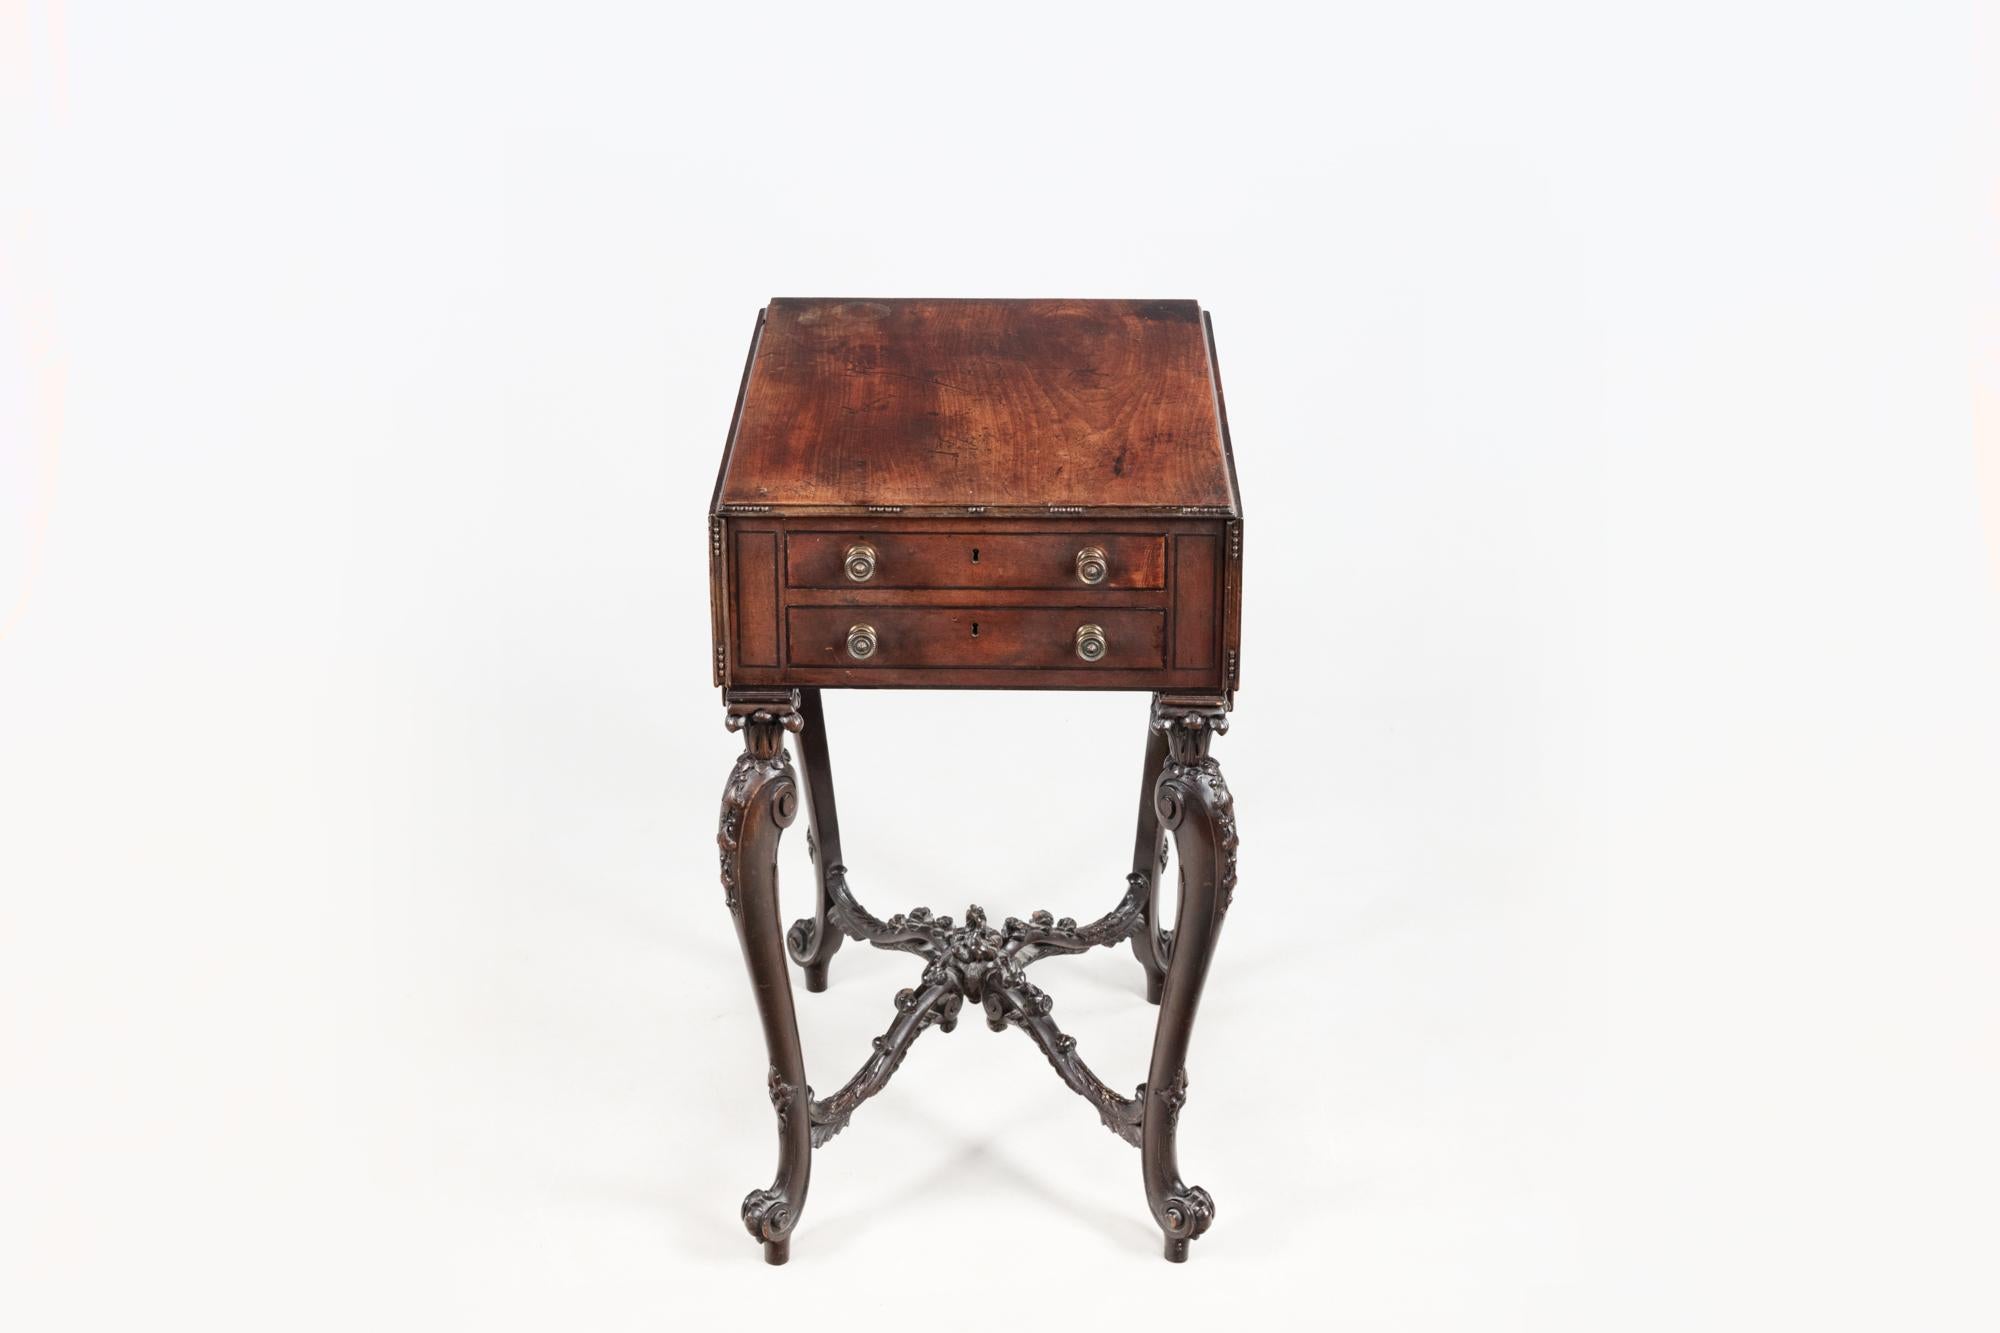 19th Century Mahogany Pembroke Table With Chippendale-Style Legs For Sale 1